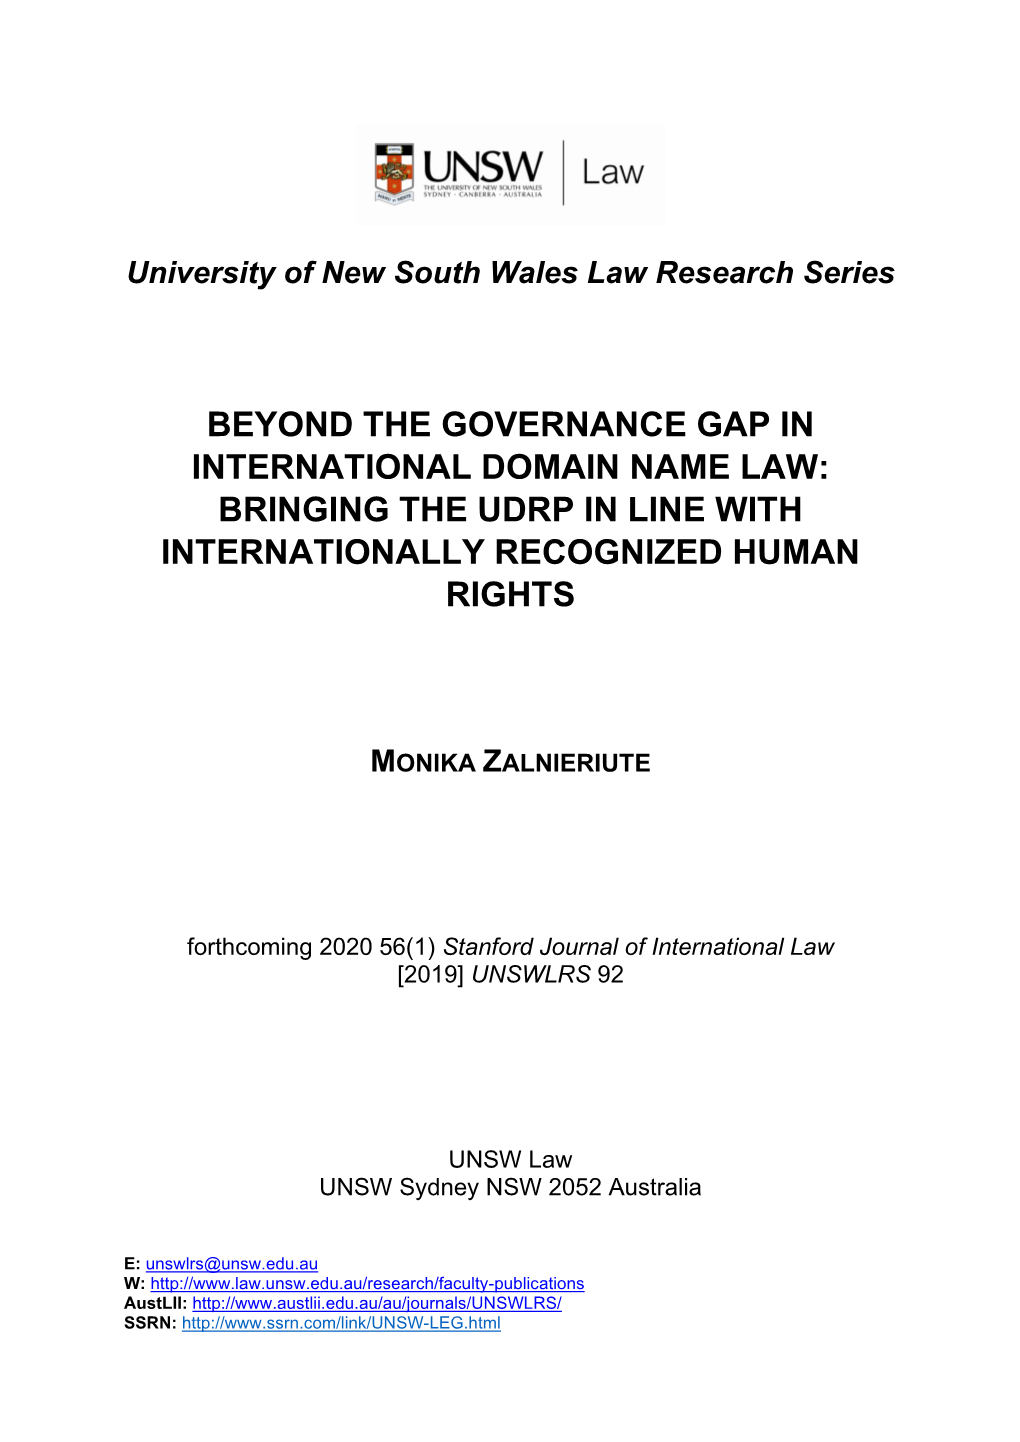 Beyond the Governance Gap in International Domain Name Law: Bringing the Udrp in Line with Internationally Recognized Human Rights